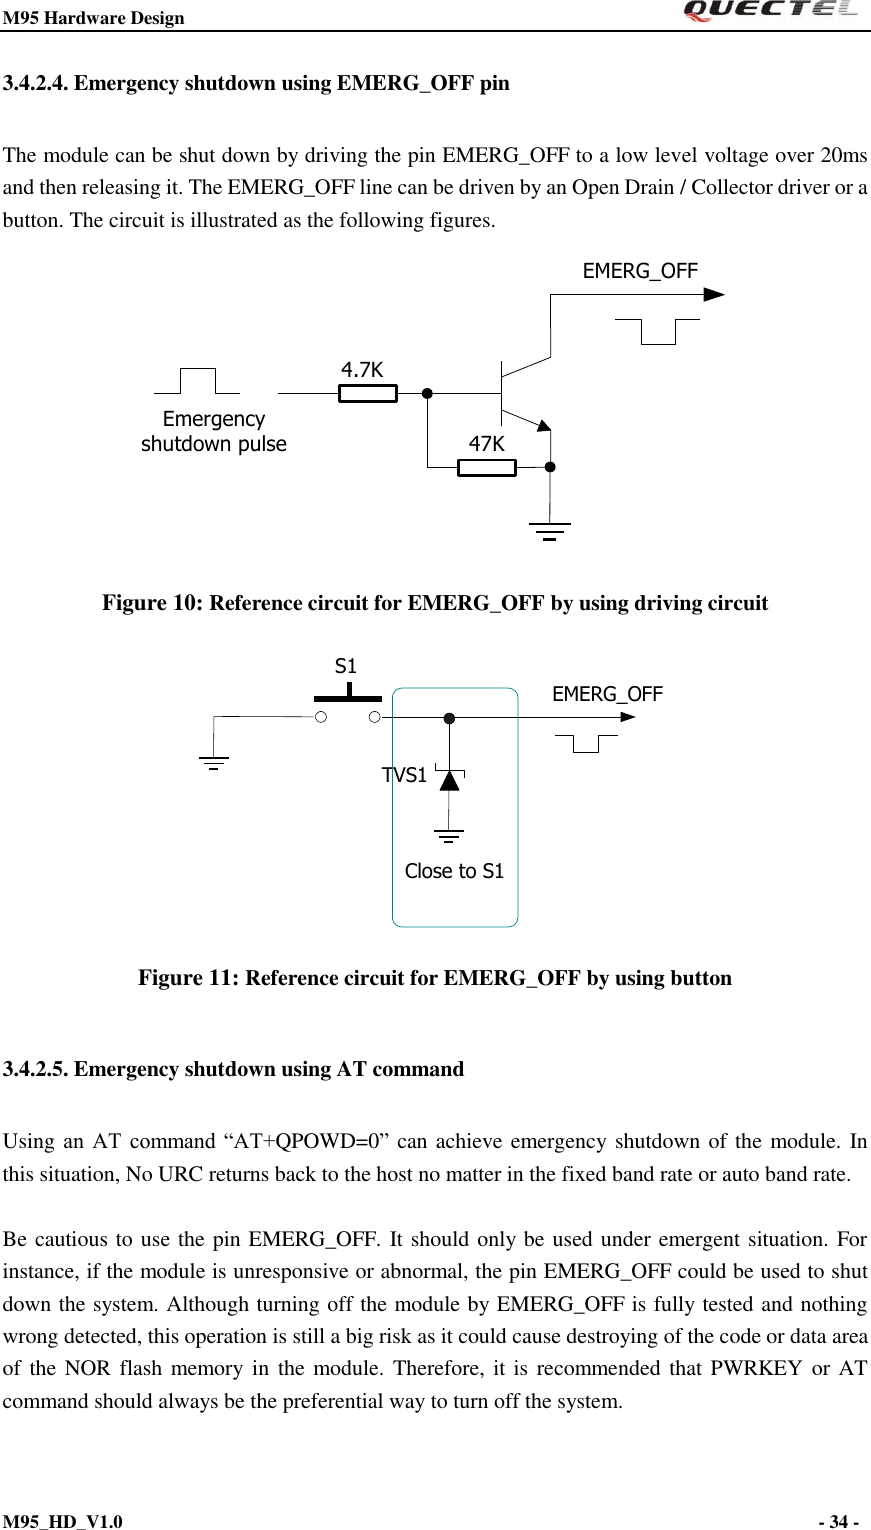 M95 Hardware Design                                                       M95_HD_V1.0                                                                - 34 -    3.4.2.4. Emergency shutdown using EMERG_OFF pin The module can be shut down by driving the pin EMERG_OFF to a low level voltage over 20ms and then releasing it. The EMERG_OFF line can be driven by an Open Drain / Collector driver or a button. The circuit is illustrated as the following figures. Emergency shutdown pulseEMERG_OFF4.7K47K Figure 10: Reference circuit for EMERG_OFF by using driving circuit S1EMERG_OFFTVS1Close to S1 Figure 11: Reference circuit for EMERG_OFF by using button 3.4.2.5. Emergency shutdown using AT command Using an  AT  command  “AT+QPOWD=0” can achieve emergency shutdown of the module. In this situation, No URC returns back to the host no matter in the fixed band rate or auto band rate.  Be cautious to use the pin EMERG_OFF. It should only be used under emergent situation. For instance, if the module is unresponsive or abnormal, the pin EMERG_OFF could be used to shut down the system. Although turning off the module by EMERG_OFF is fully tested and nothing wrong detected, this operation is still a big risk as it could cause destroying of the code or data area of the NOR flash memory in  the module. Therefore,  it is recommended that PWRKEY or AT command should always be the preferential way to turn off the system. 